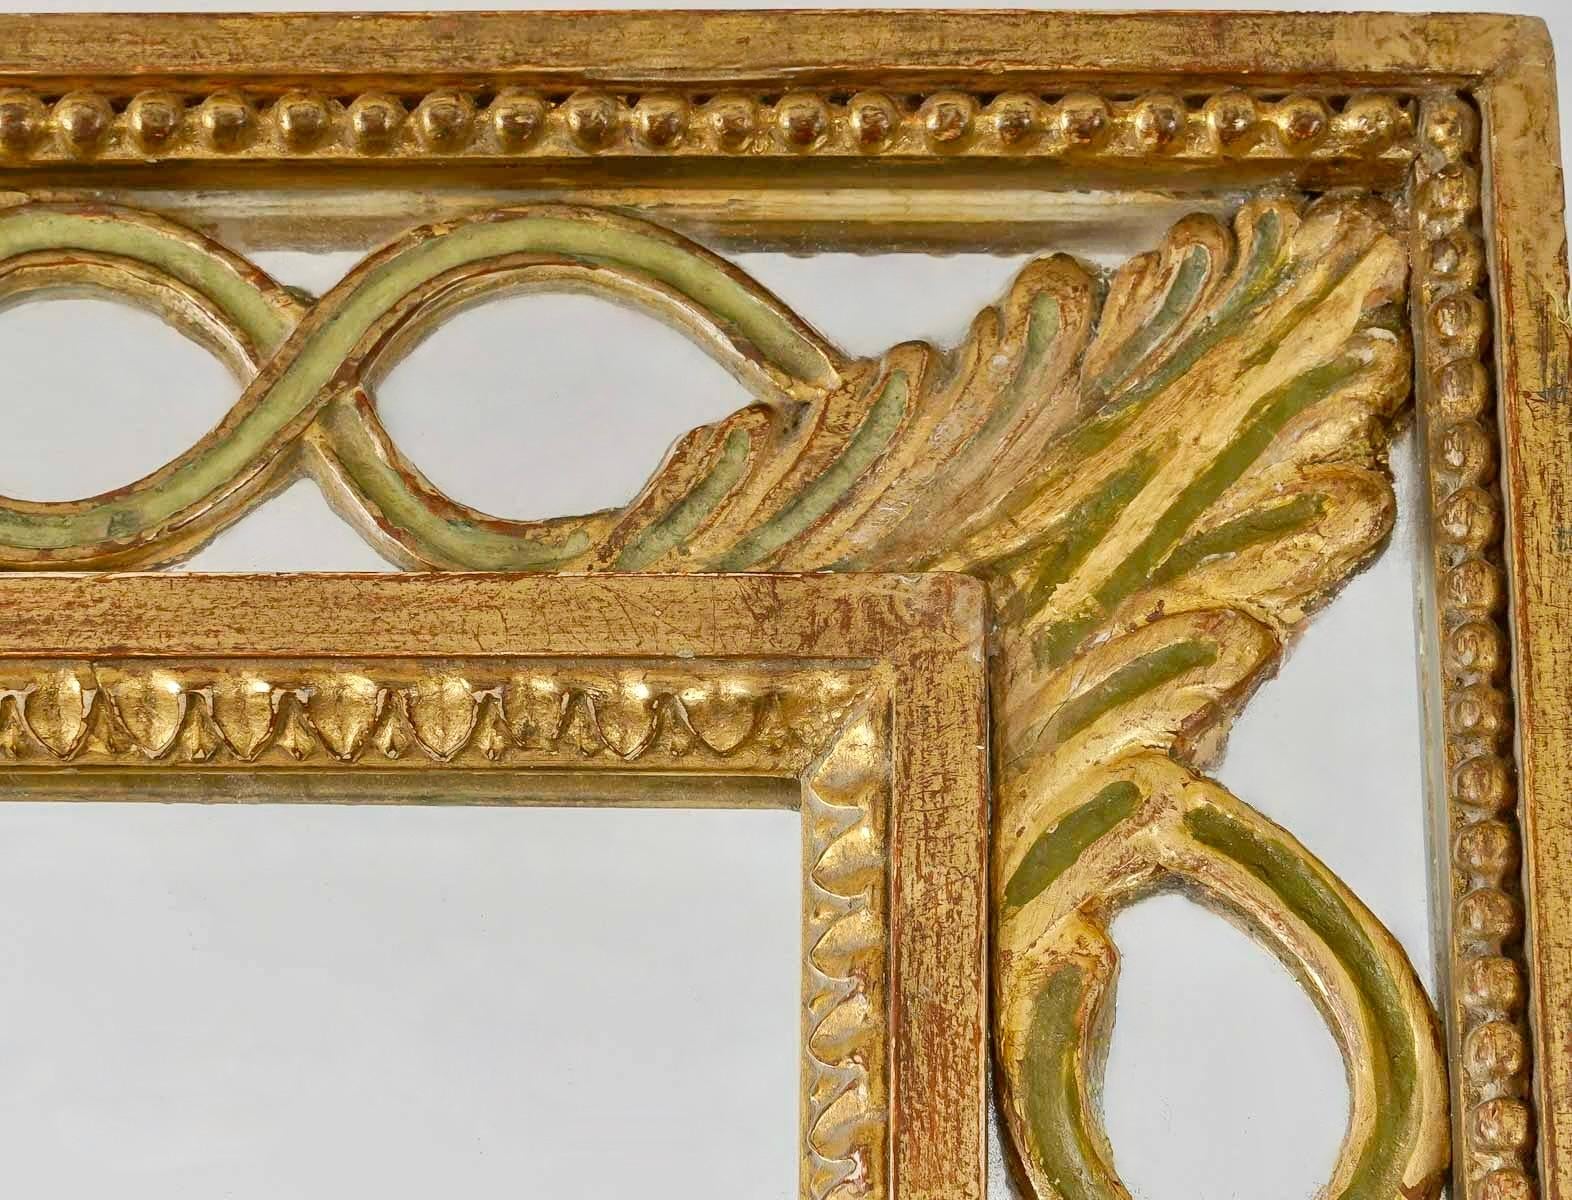 1960 Miroir a parclose de la maison Roche

Composed of a gilded wood frame decorated and underlined on the inside by a parclose surround forming a gilded wood interlace, enhanced on the edge by a water-green fillet.
It is covered with a mirror that